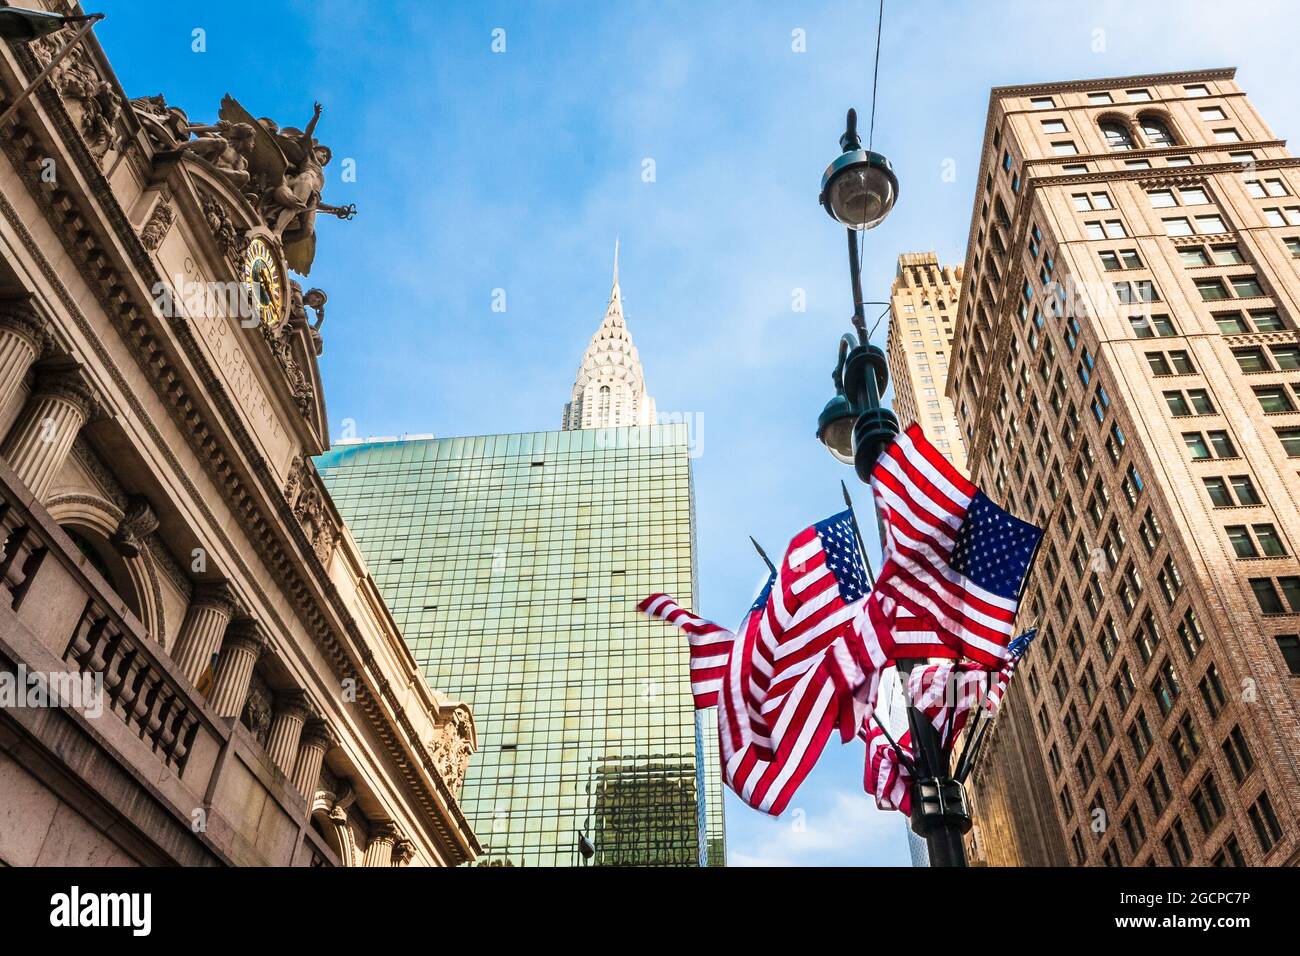 US flags on lamp-post outside Grand Central Station (Grand Central Terminus), New York City, NY, USA. Stock Photo